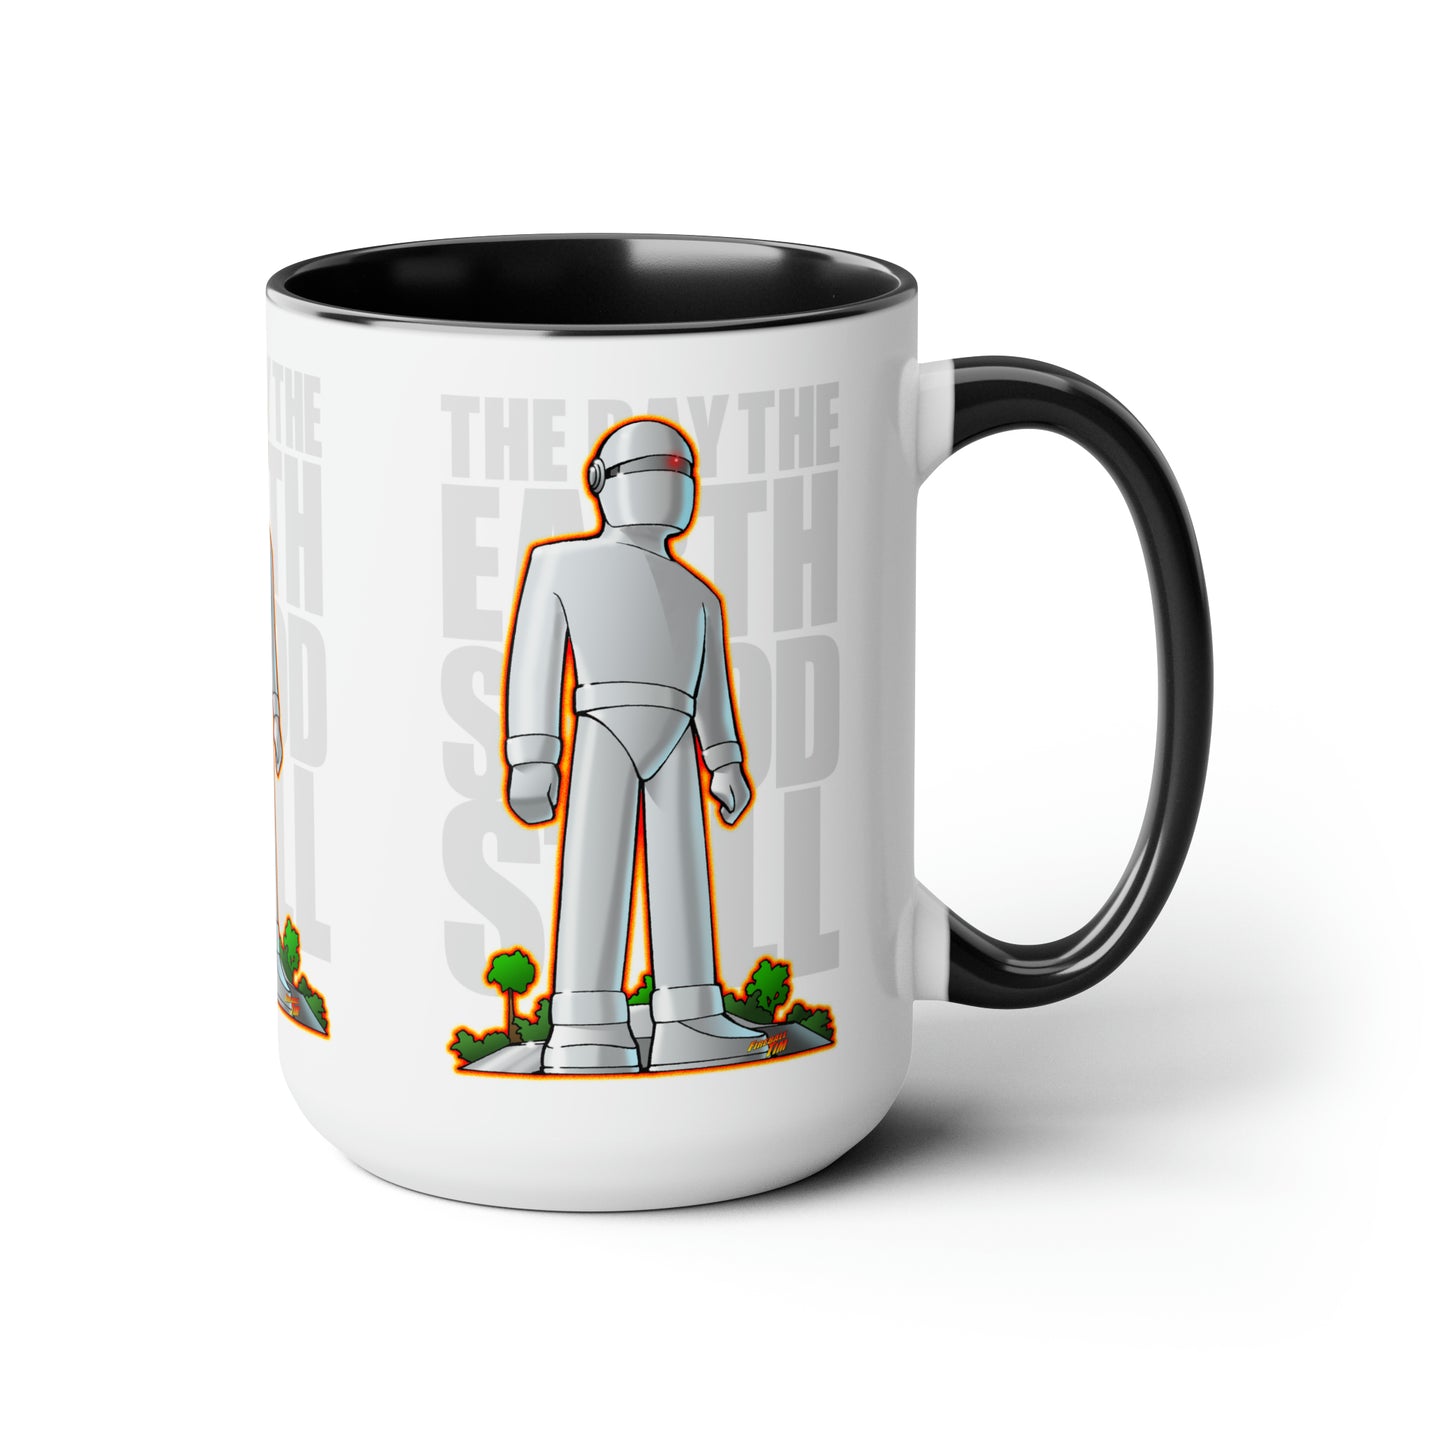 THE DAY THE EARTH STOOD STILL Vintage Gort Robot Coffee Mug 15oz 2 Colors